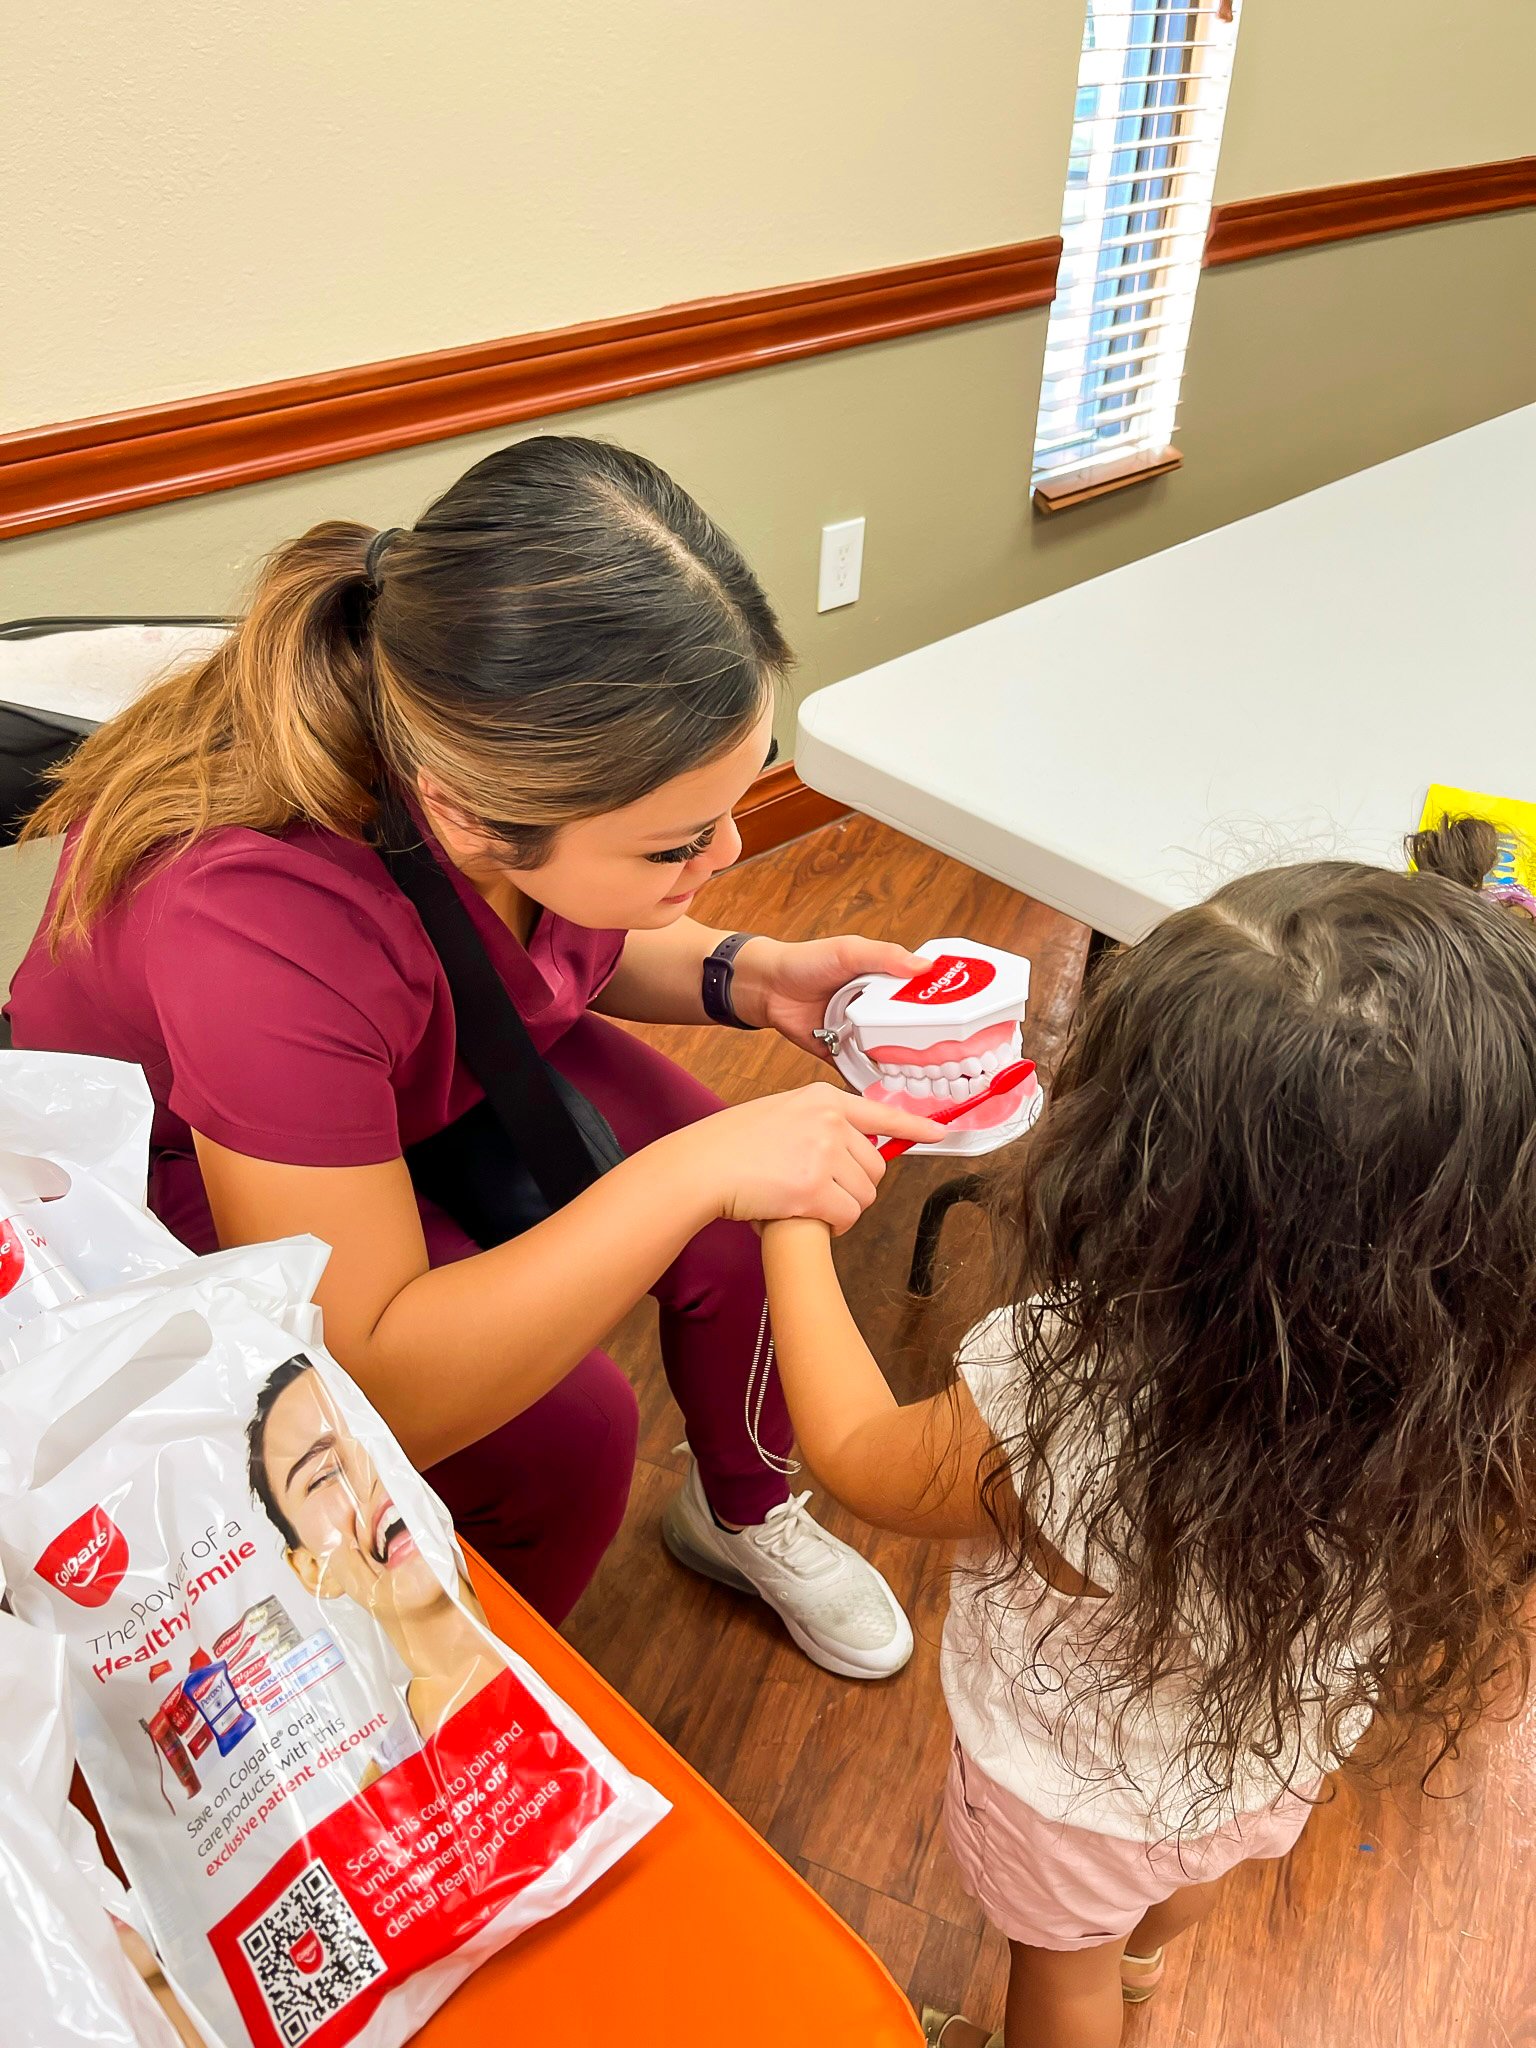 Volunteers from UTHealth Houston School of Dentistry provided oral hygiene instruction, in addition to screenings and sharing helpful dental information to children.